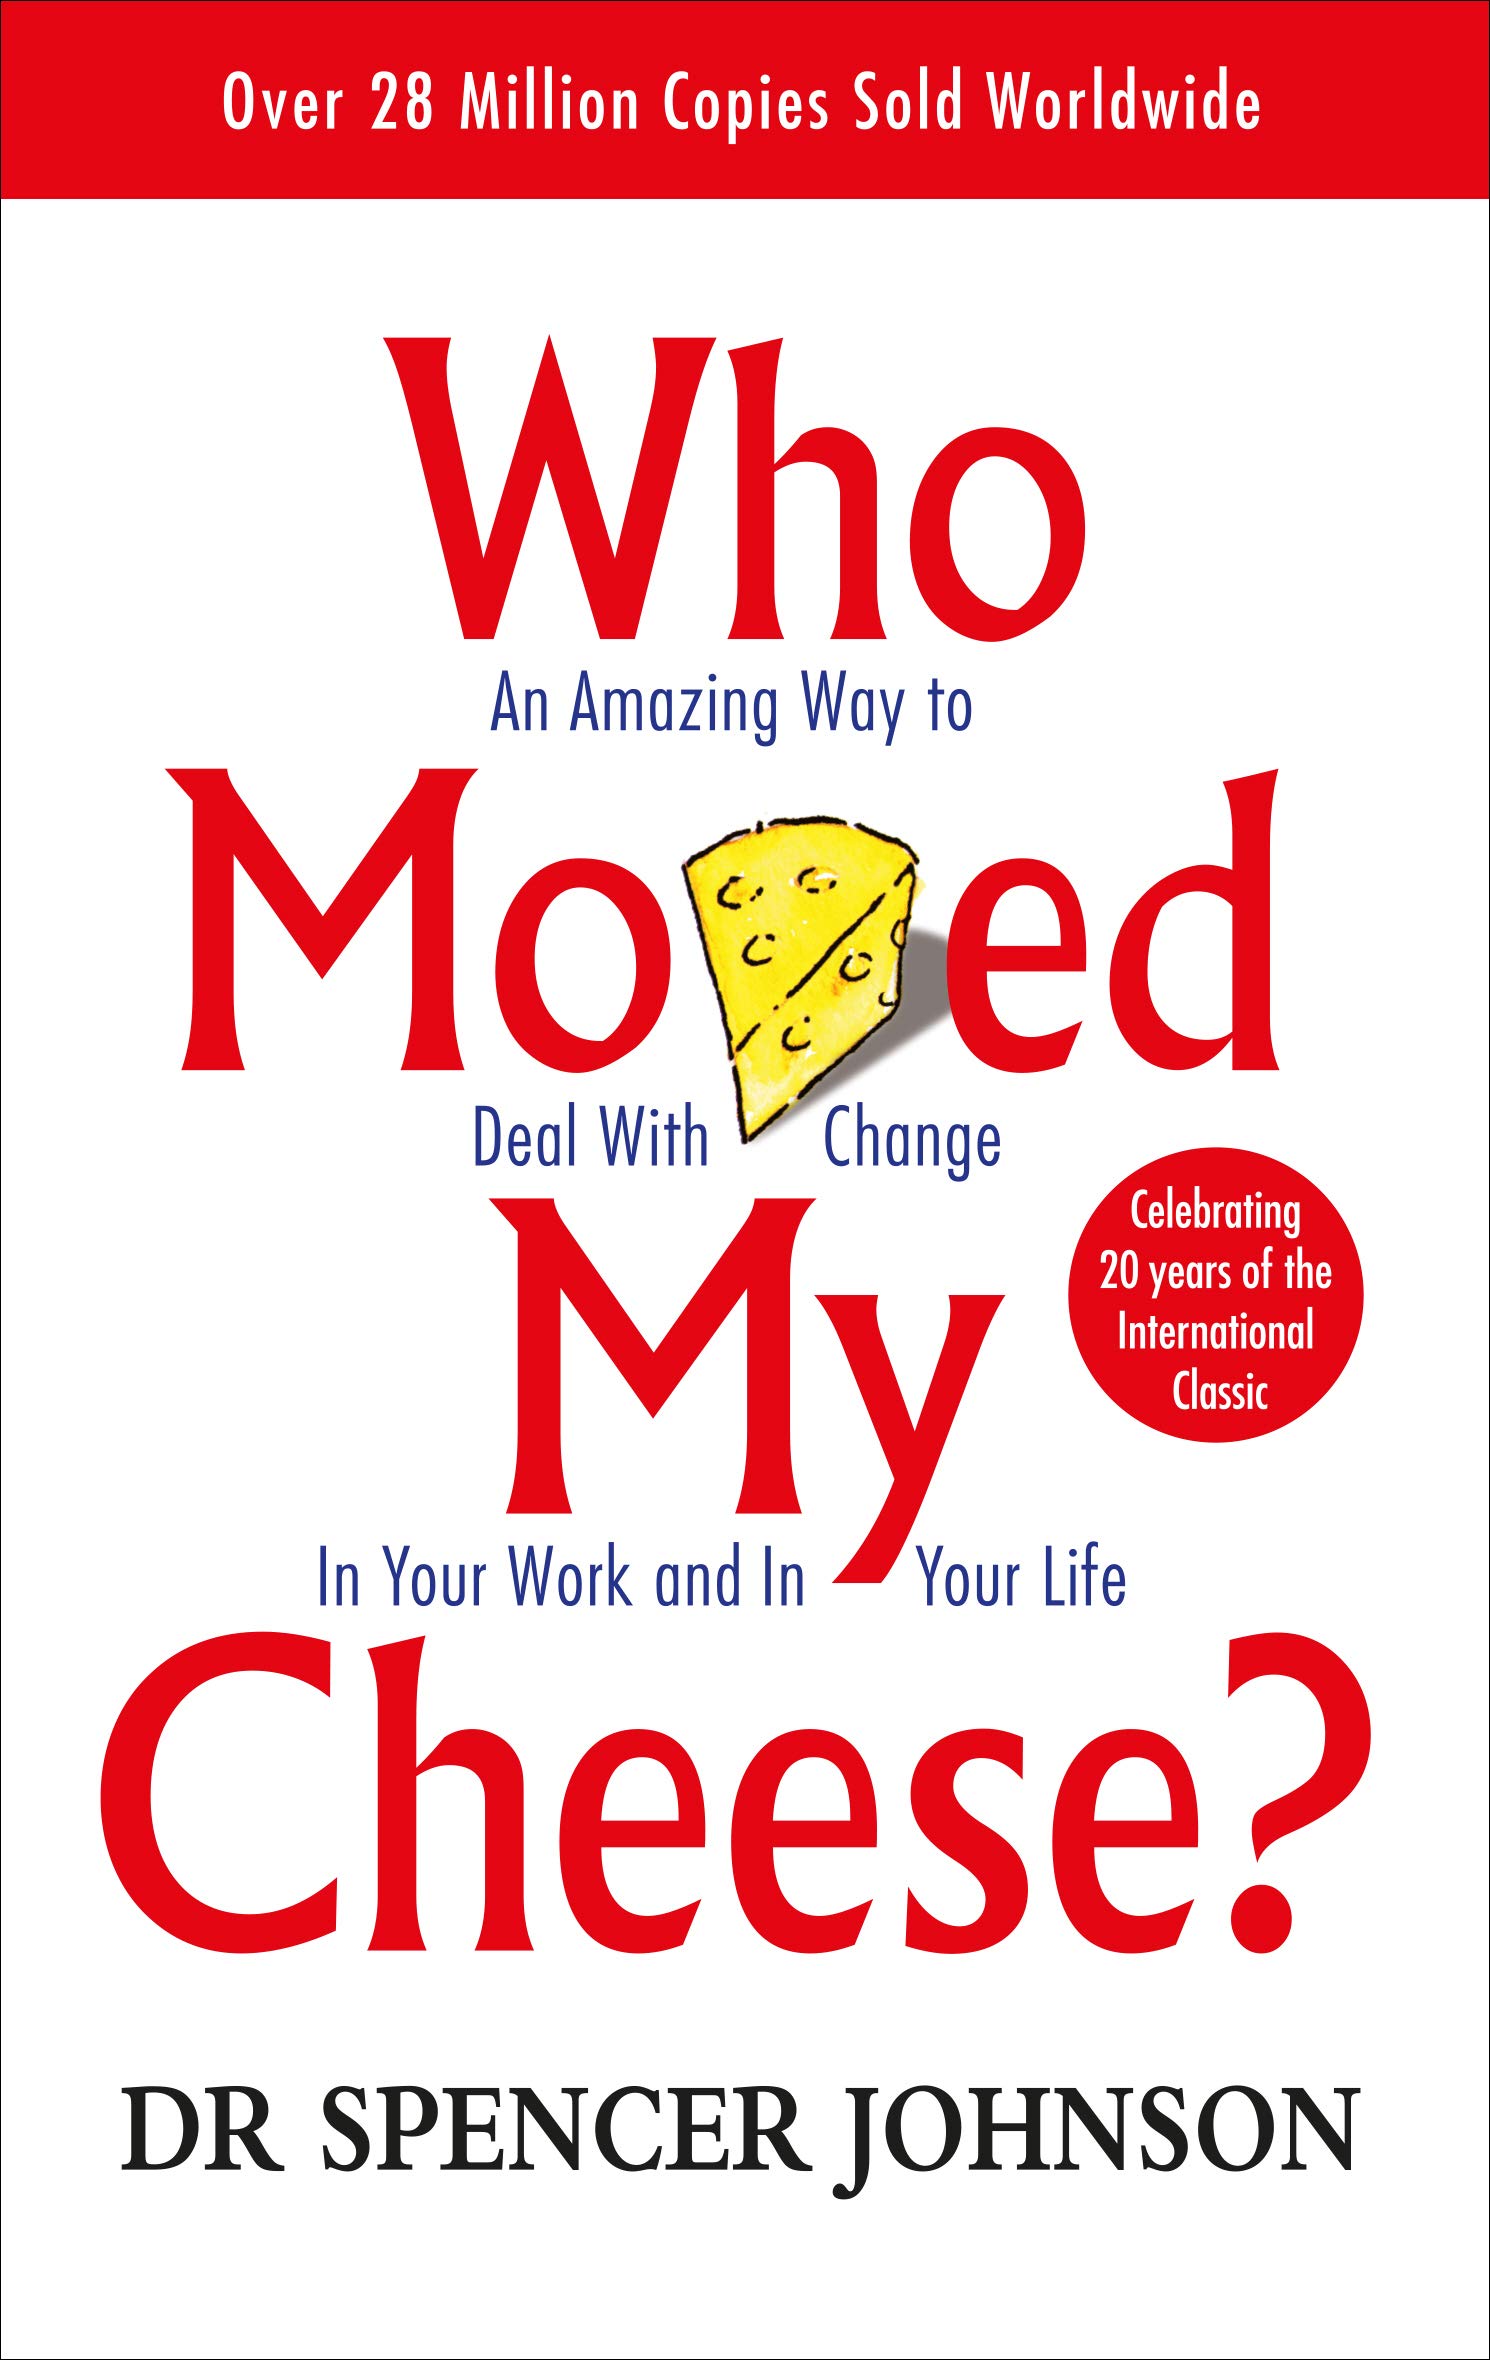 Who Moved My Cheese by Dr. Spencer Johnson